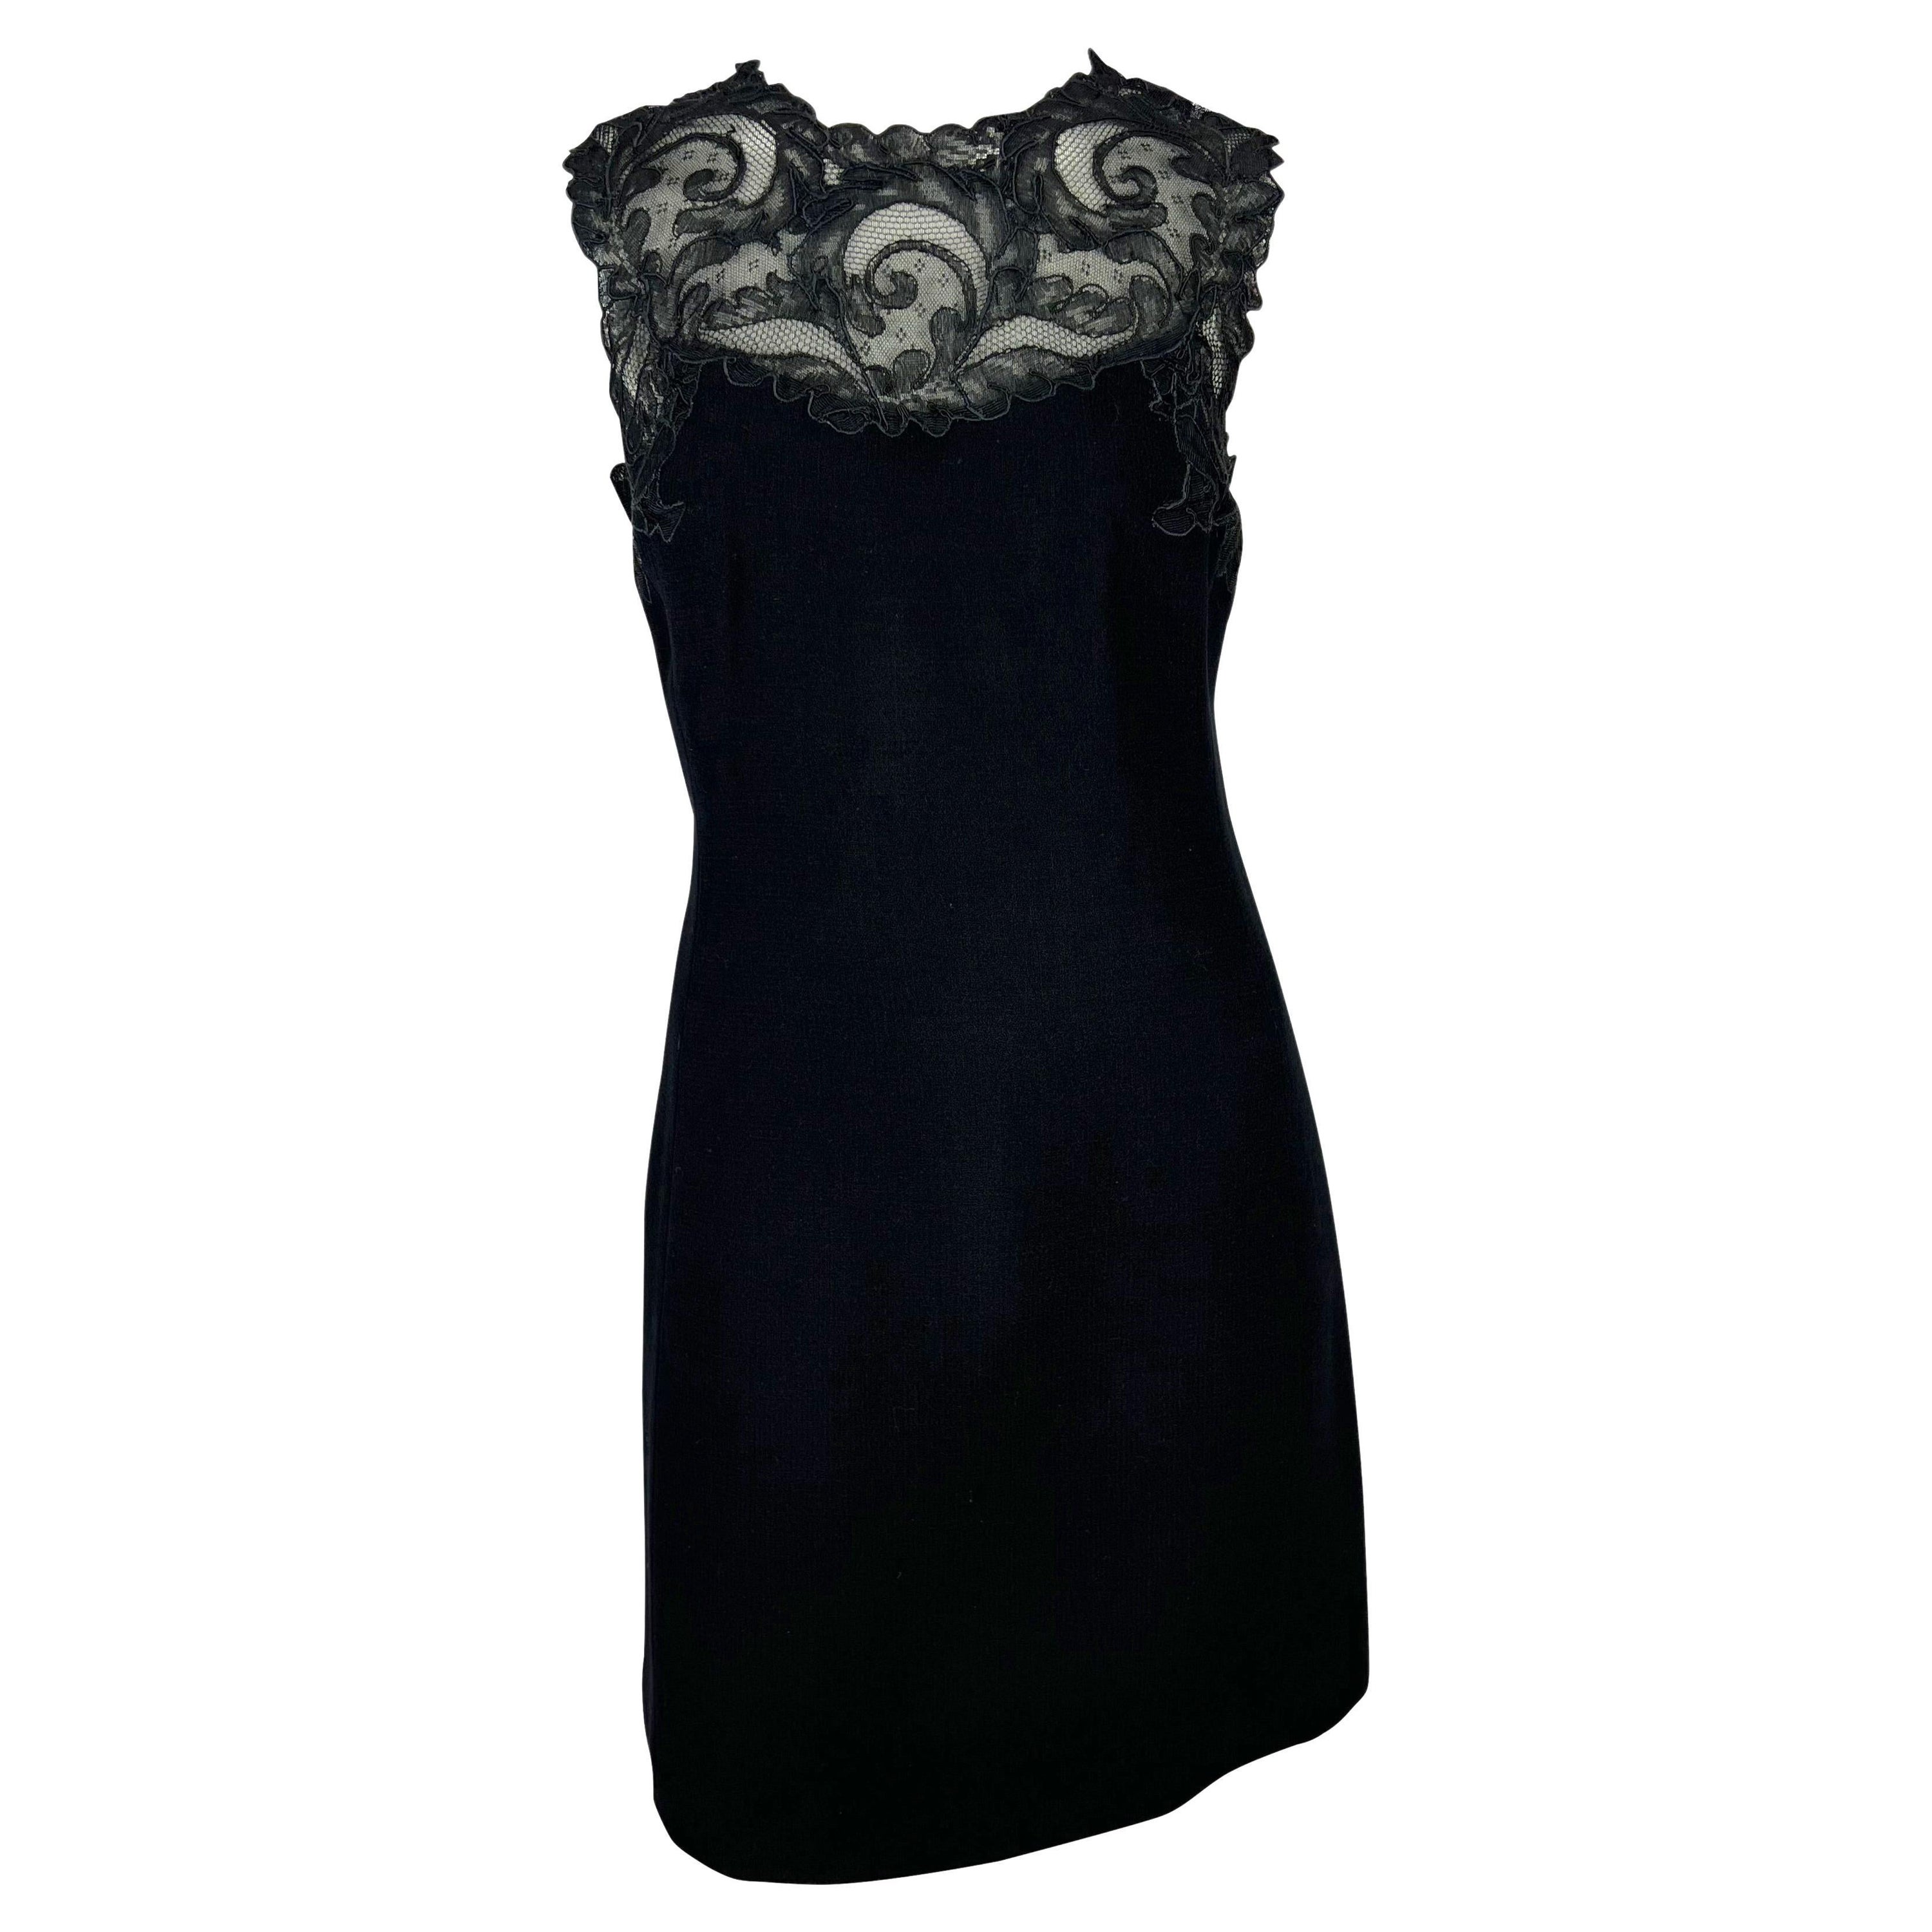 F/W 1996 Gianni Versace Couture Black Lace Bust Wool Stretch Dress For Sale